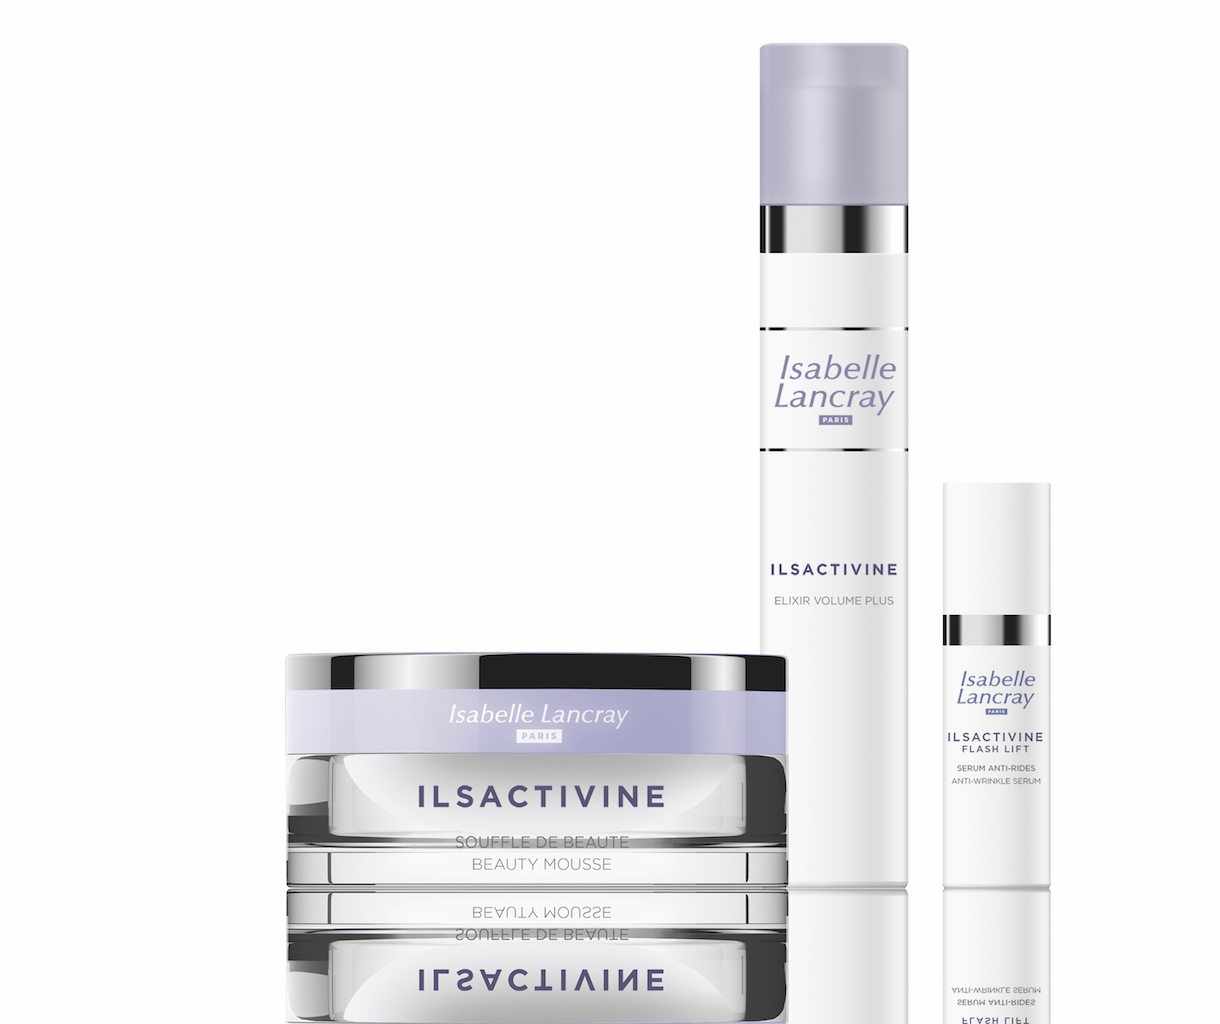 ILSACTIVINE_all products_white